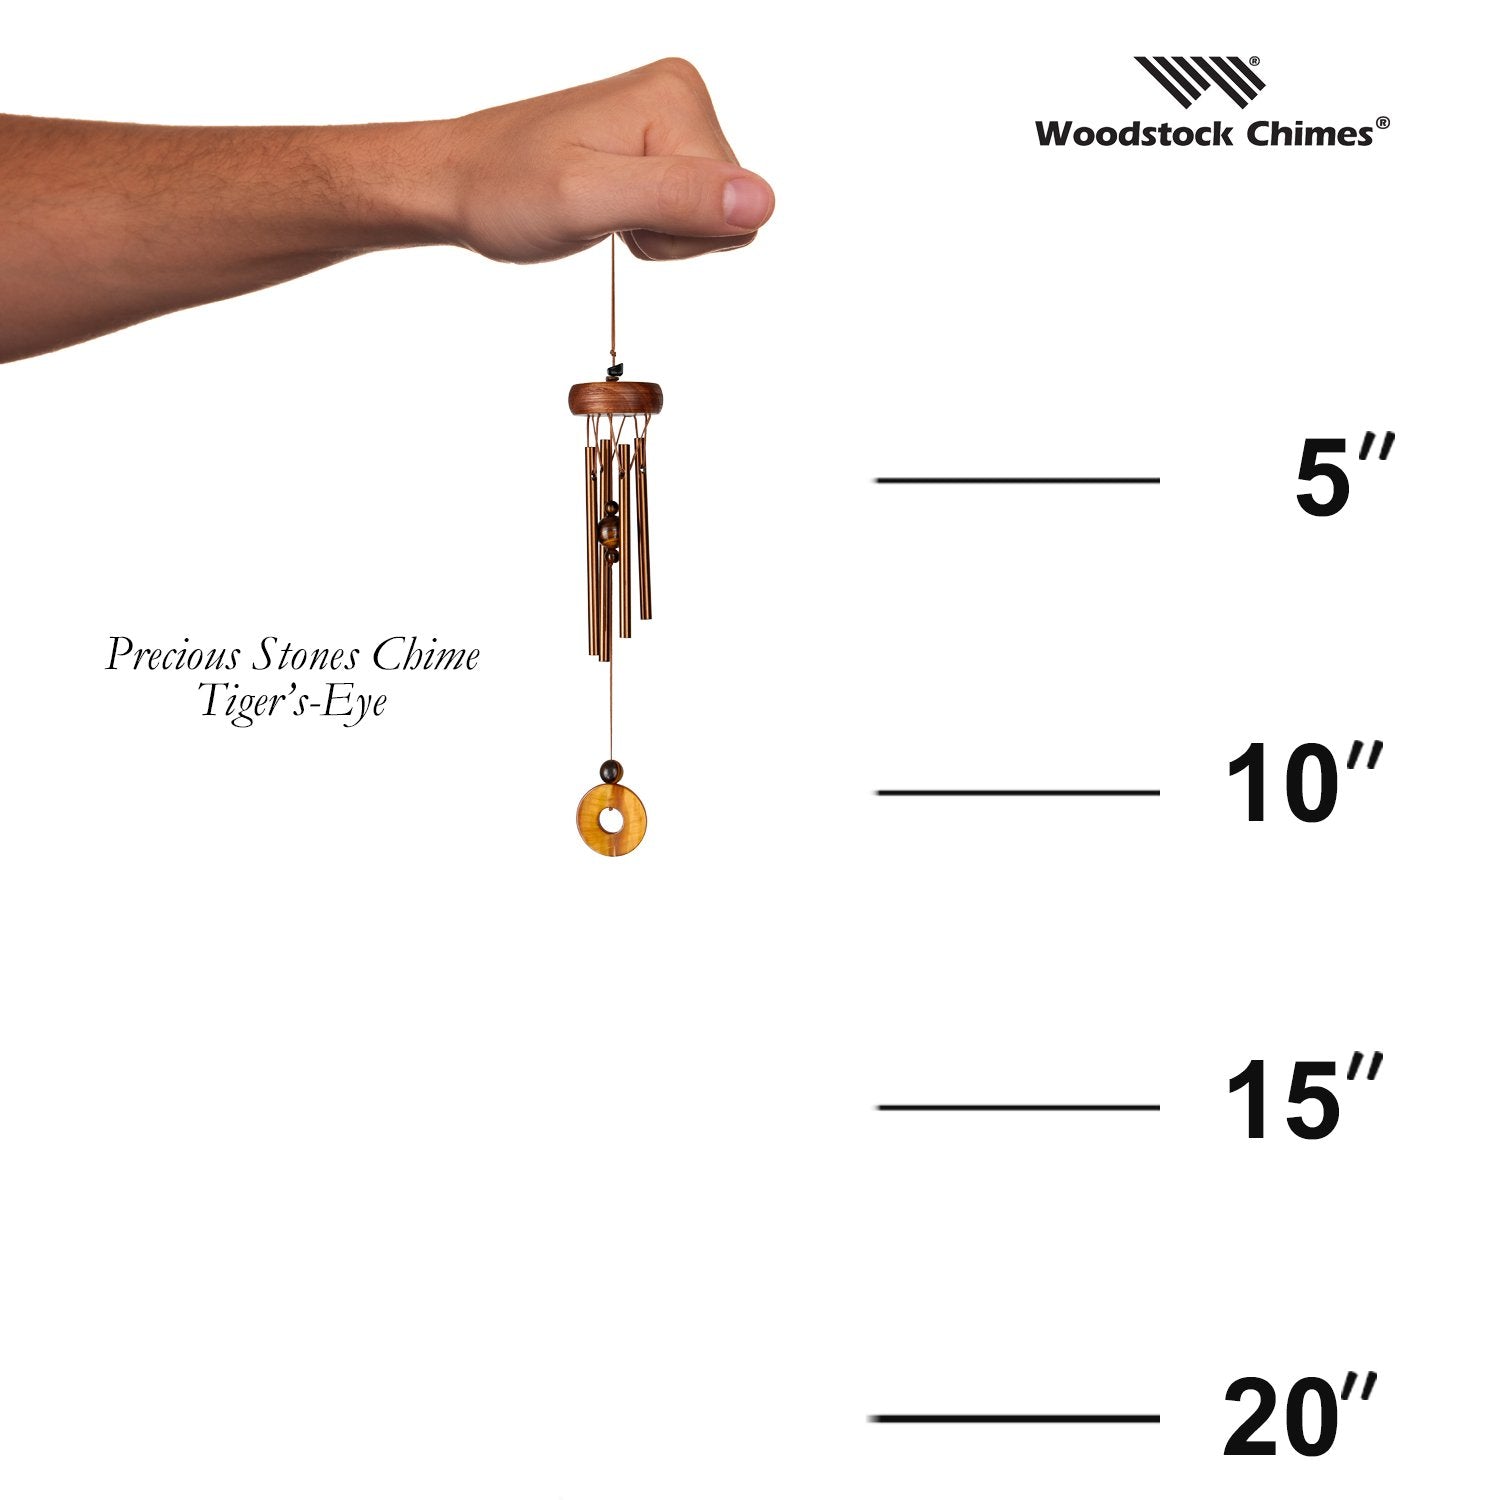 Precious Stones Chime - Tiger's Eye proportion image